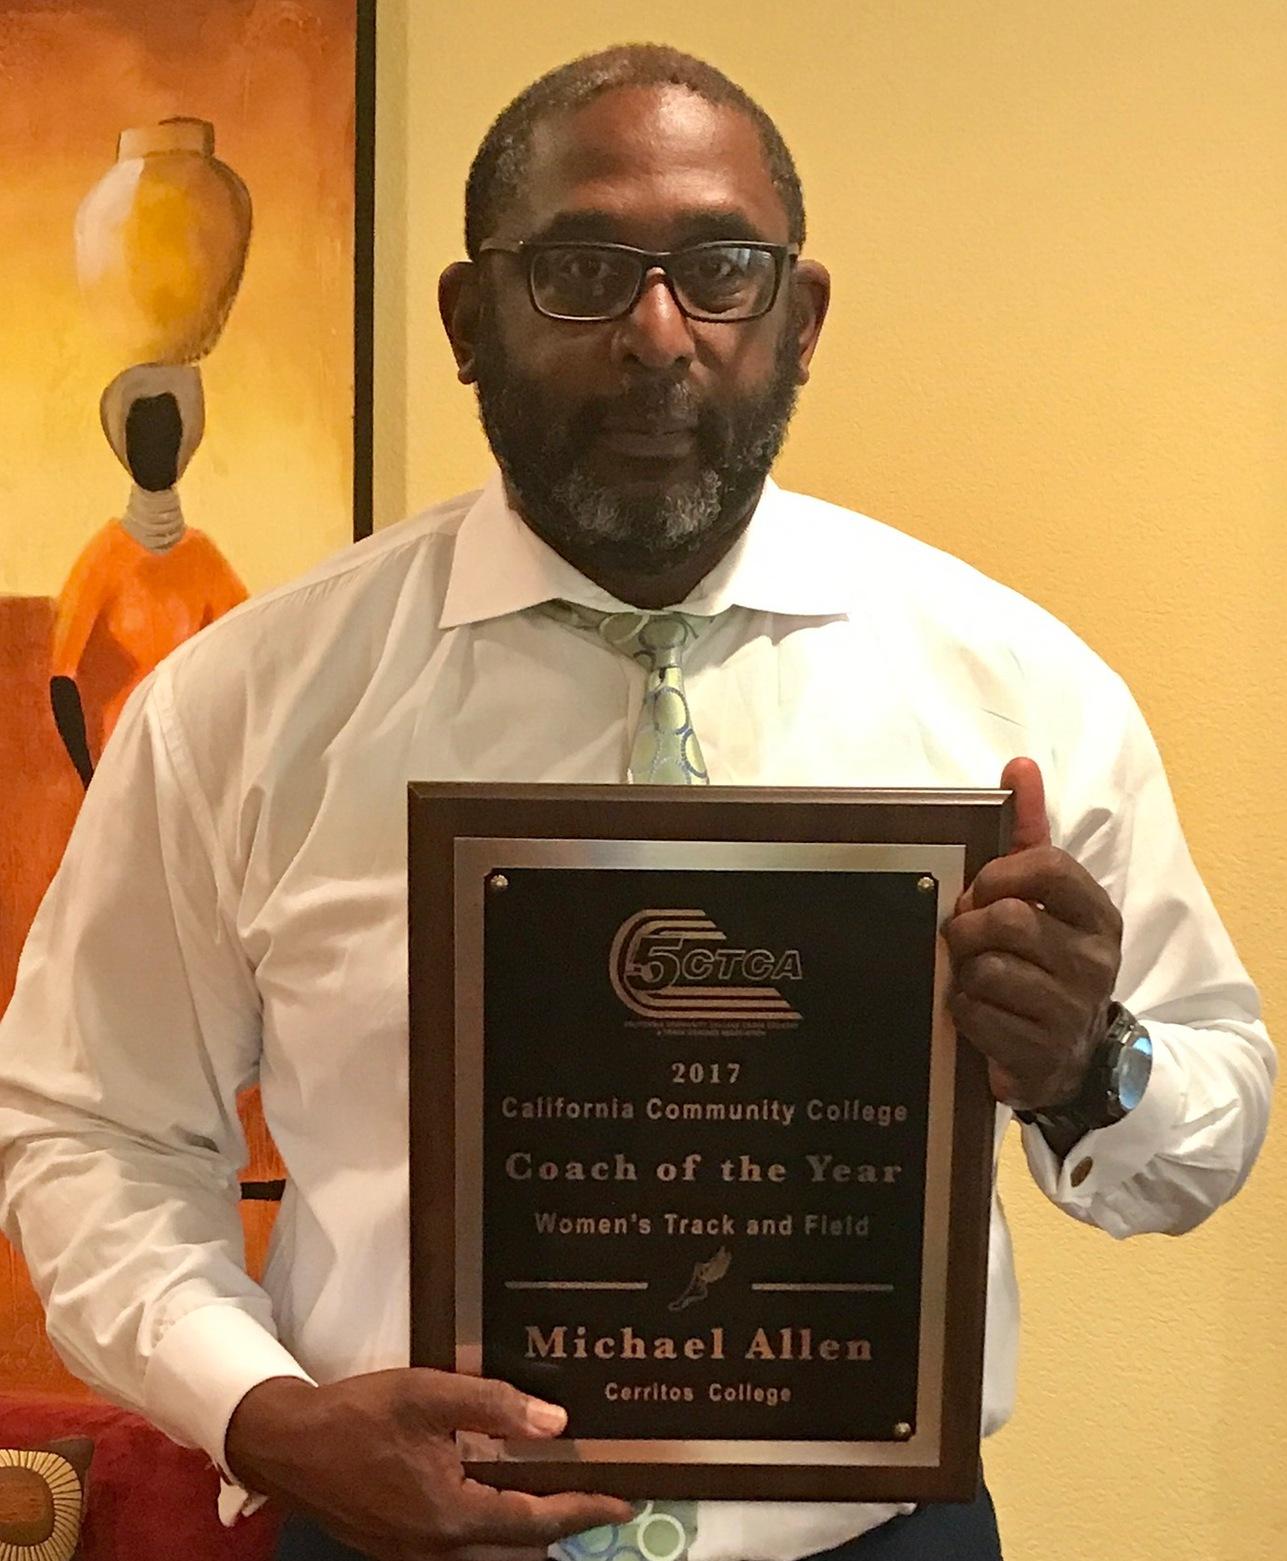 Women's Track & Field Coach Michael Allen named Coach of the Year